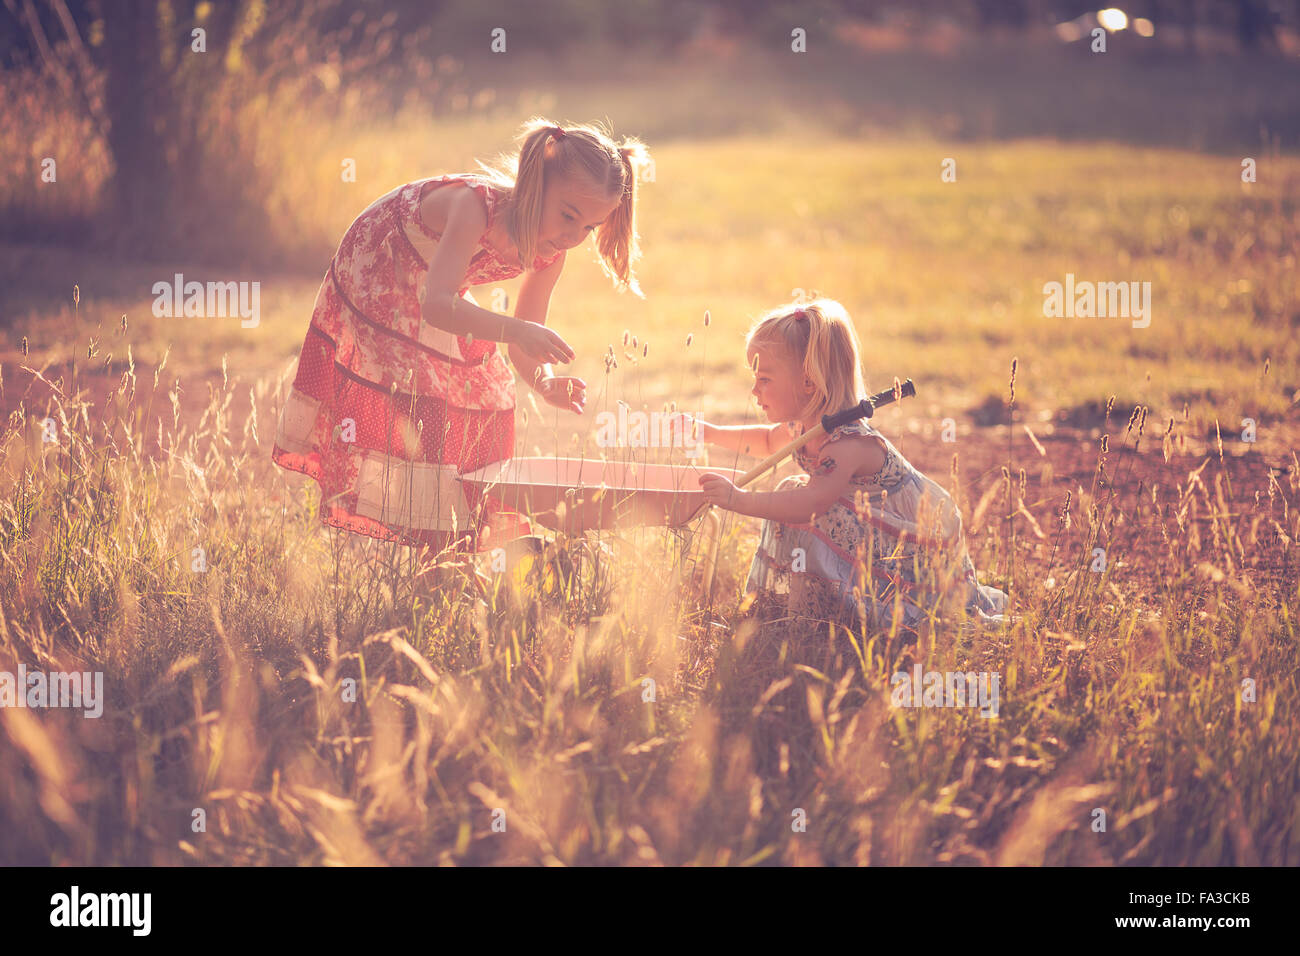 Two little sisters enjoying playing in nature Stock Photo